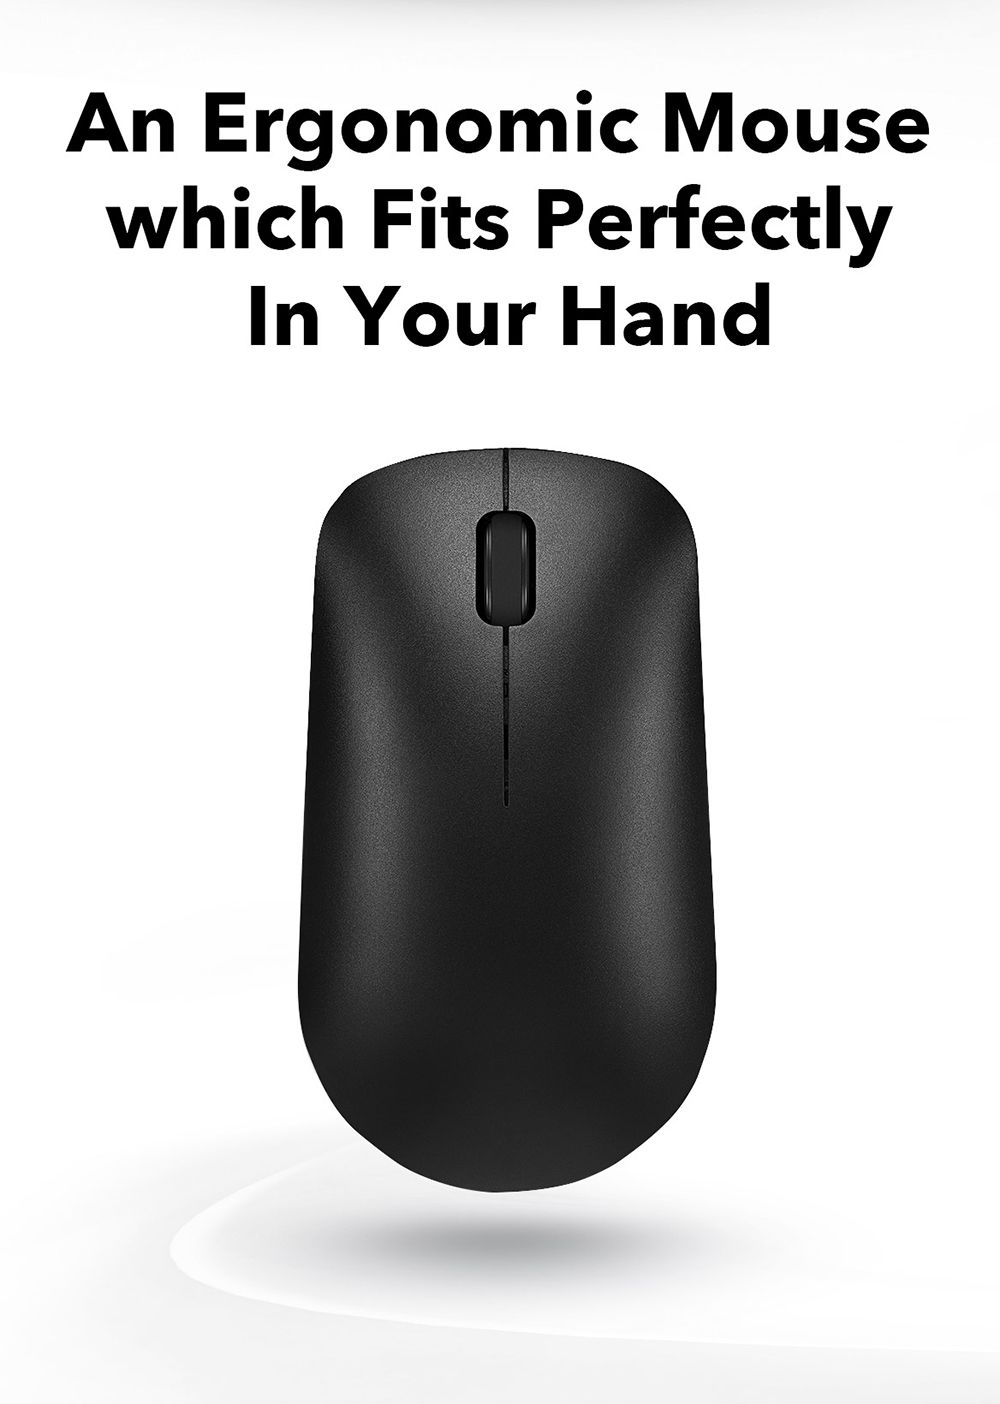 Honor-Wireless-bluetooth-Mouse-bluetooth-42-1000DPI-Ergonomic-Mute-Button-Mouse-for-Computer-Laptop-1718192